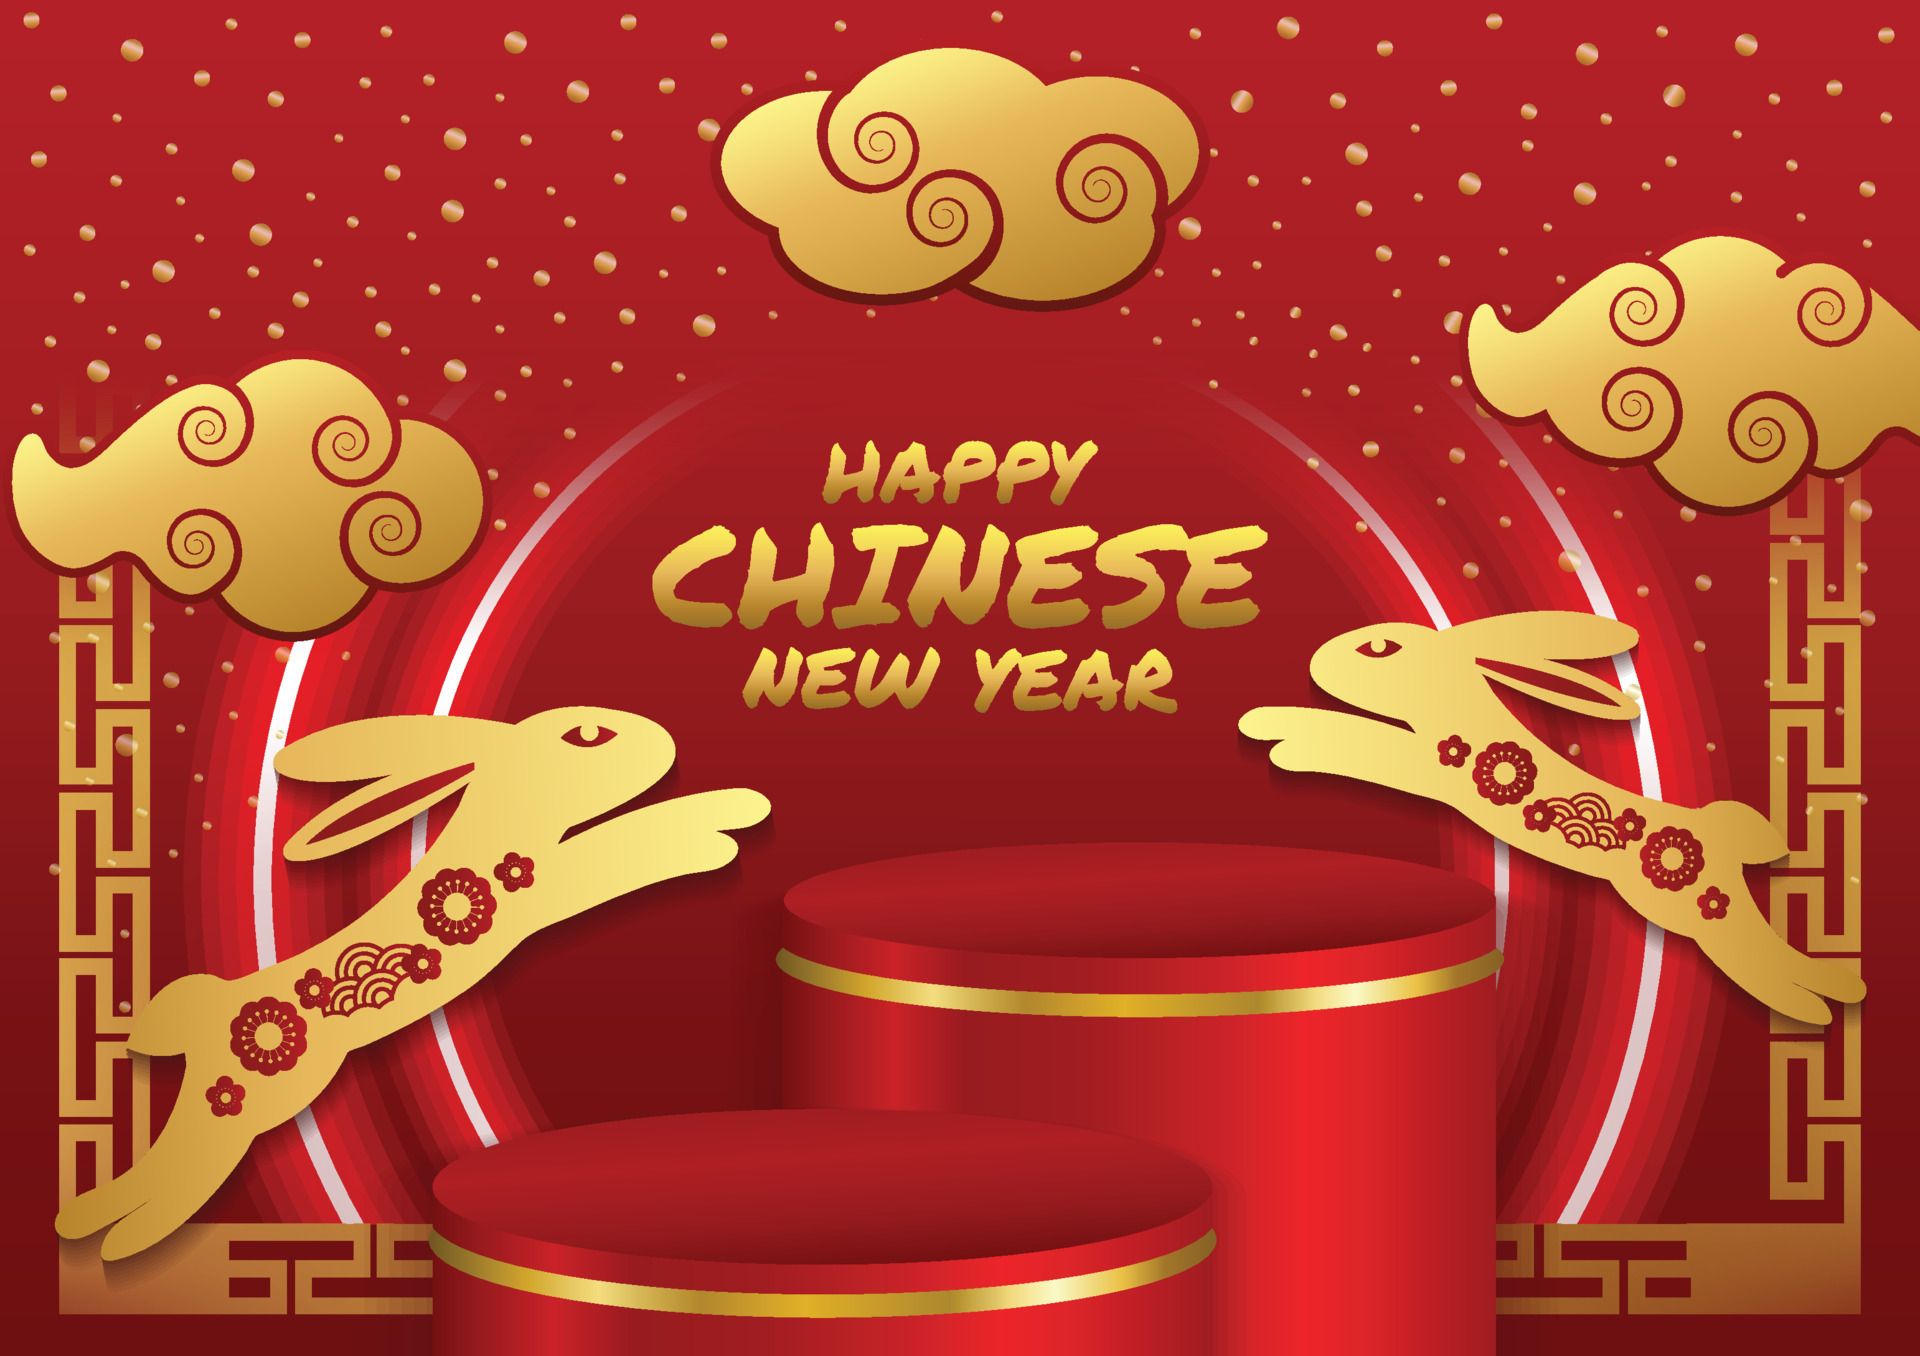 200+] Chinese New Year Wallpapers